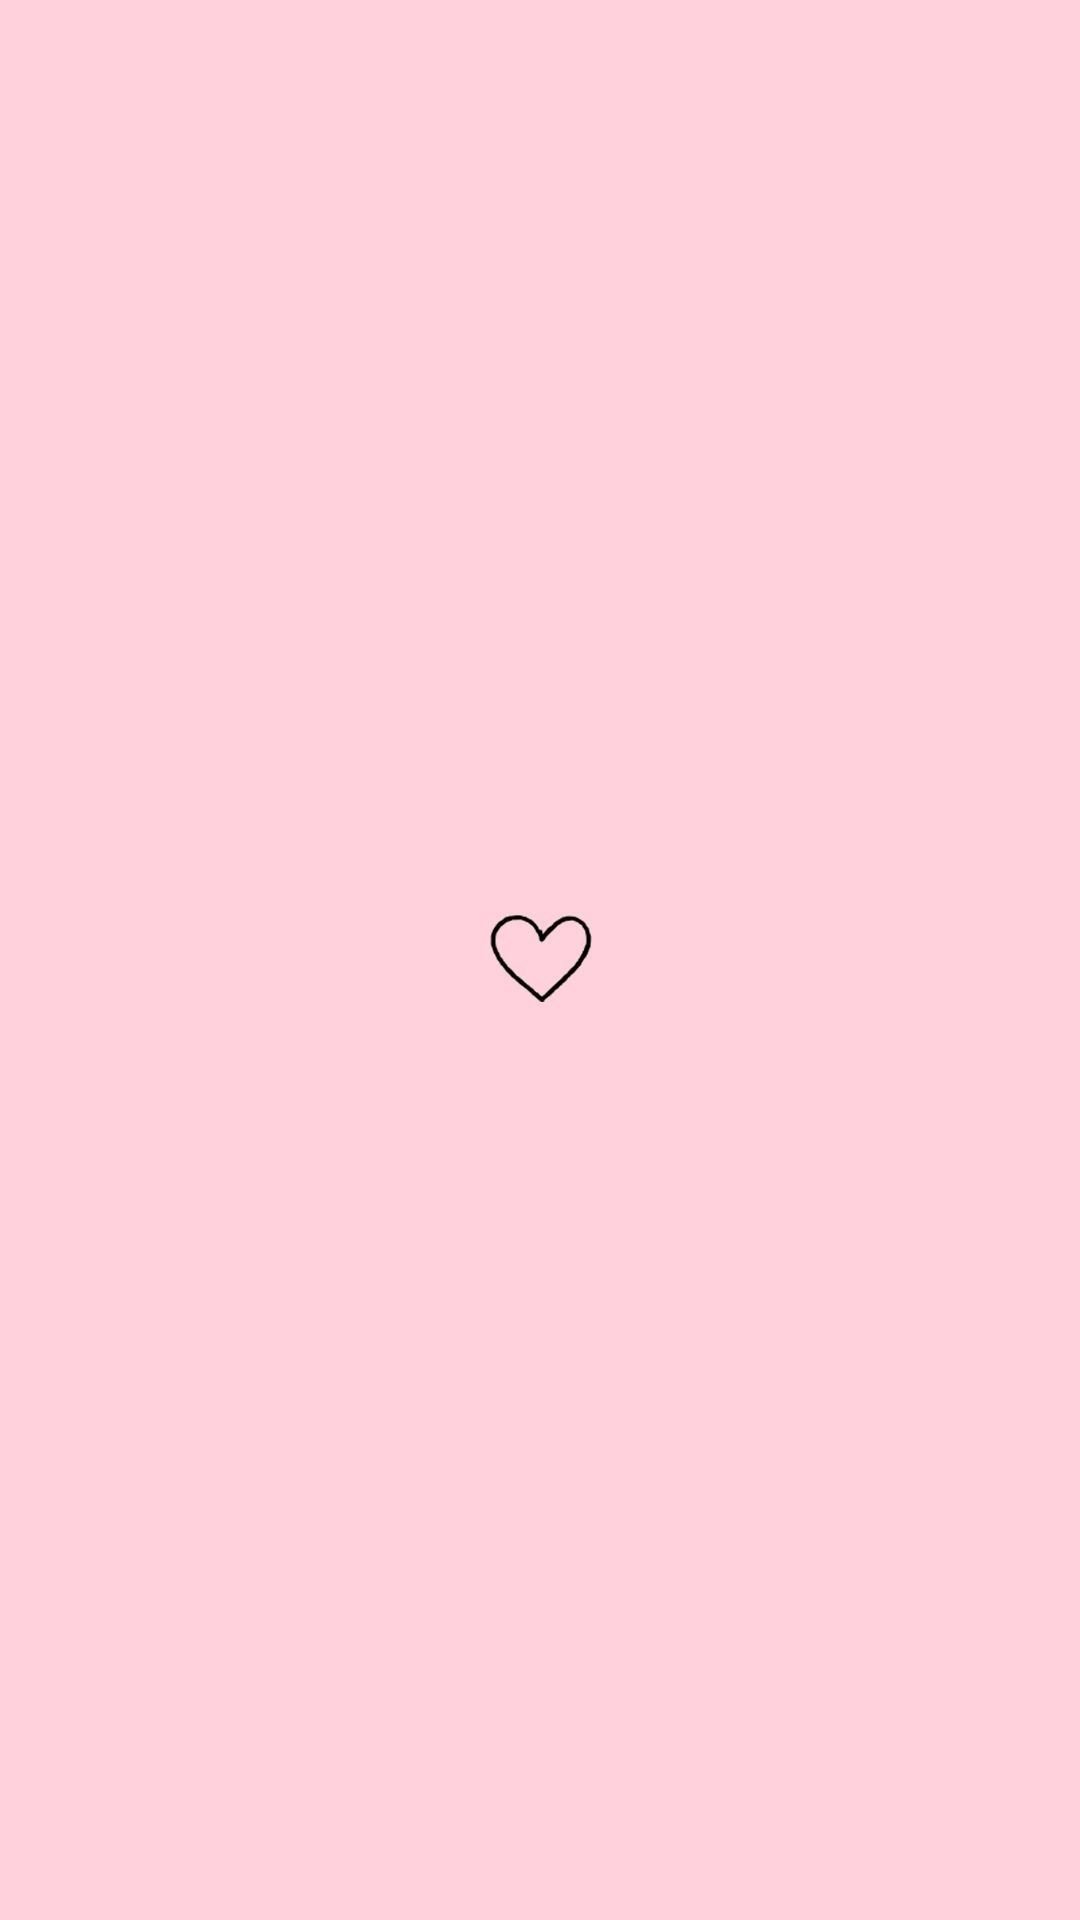 Small Heart With Pink Background